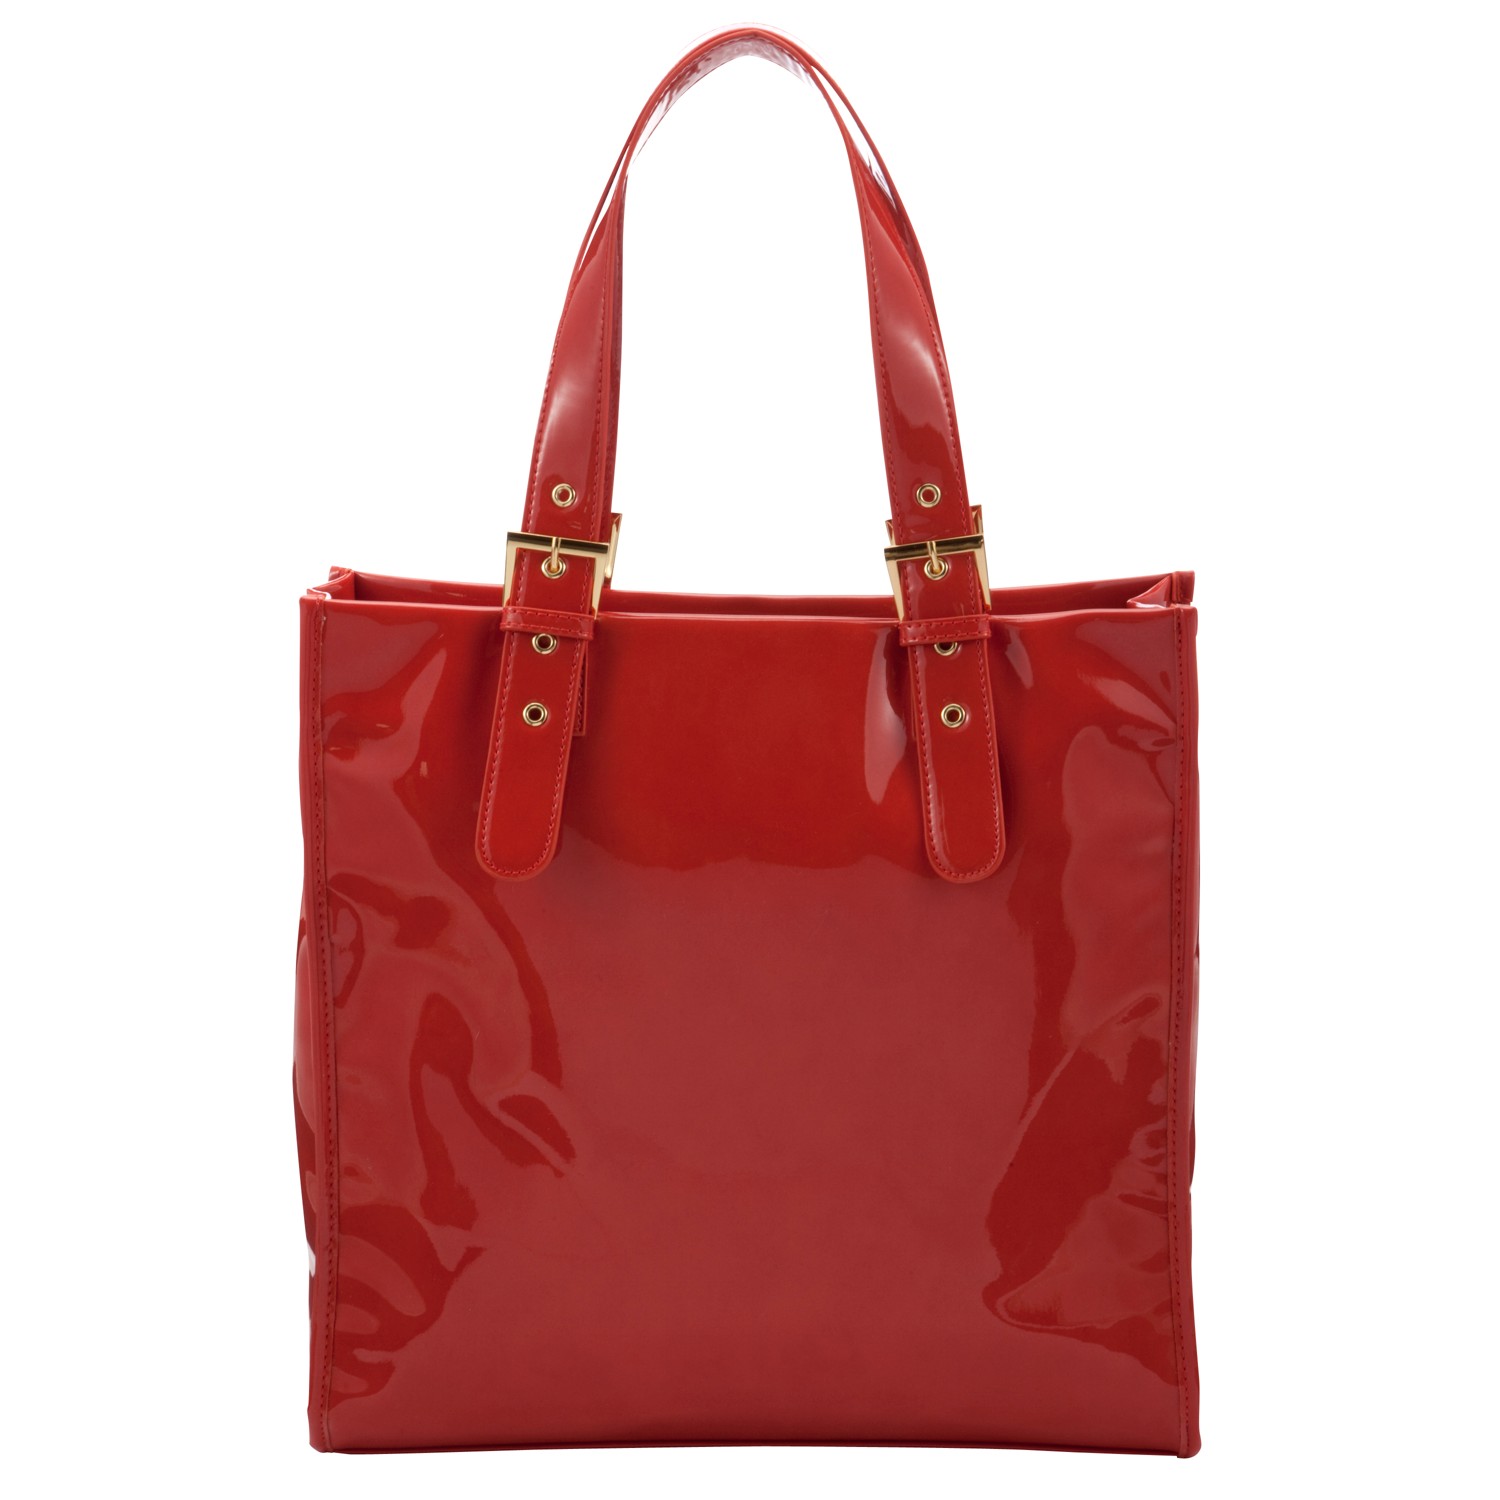 Ted Baker Patent Buckle Tote Bag in Red - Lyst